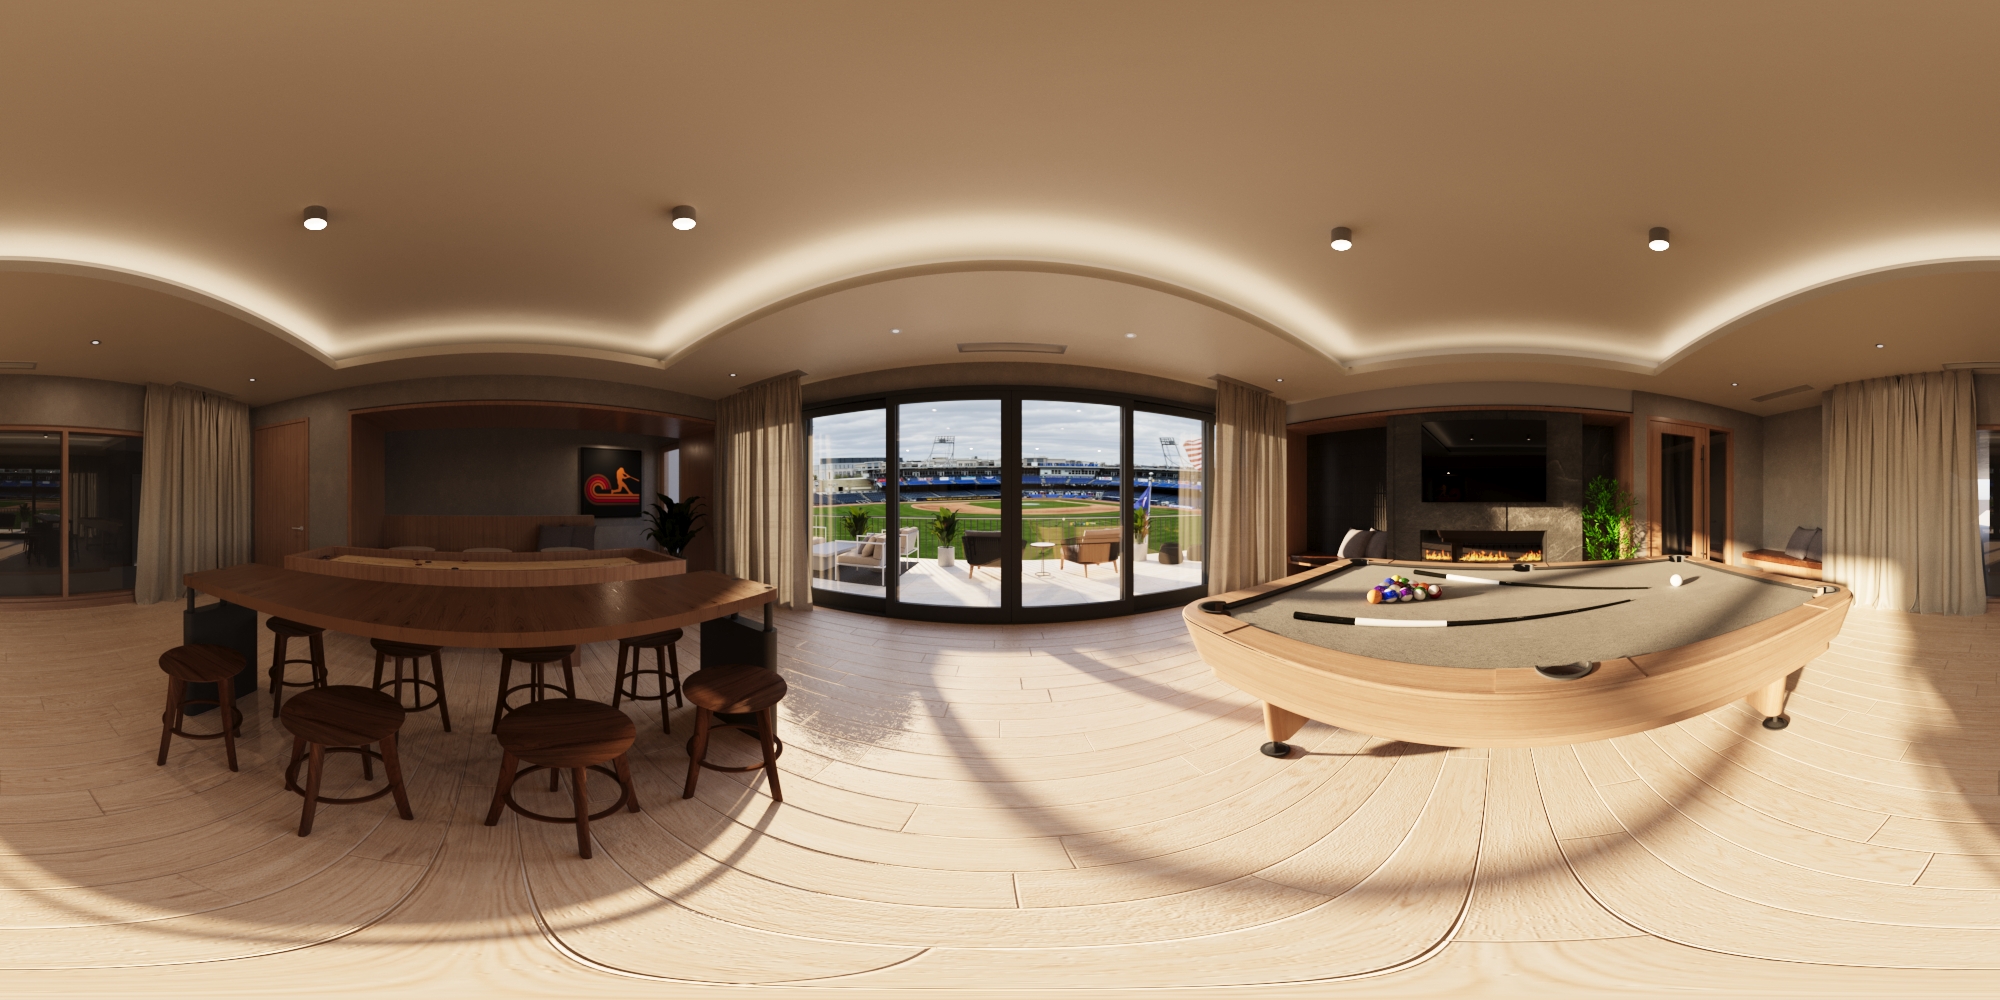 Panoramic views of a common area in an apartment building.